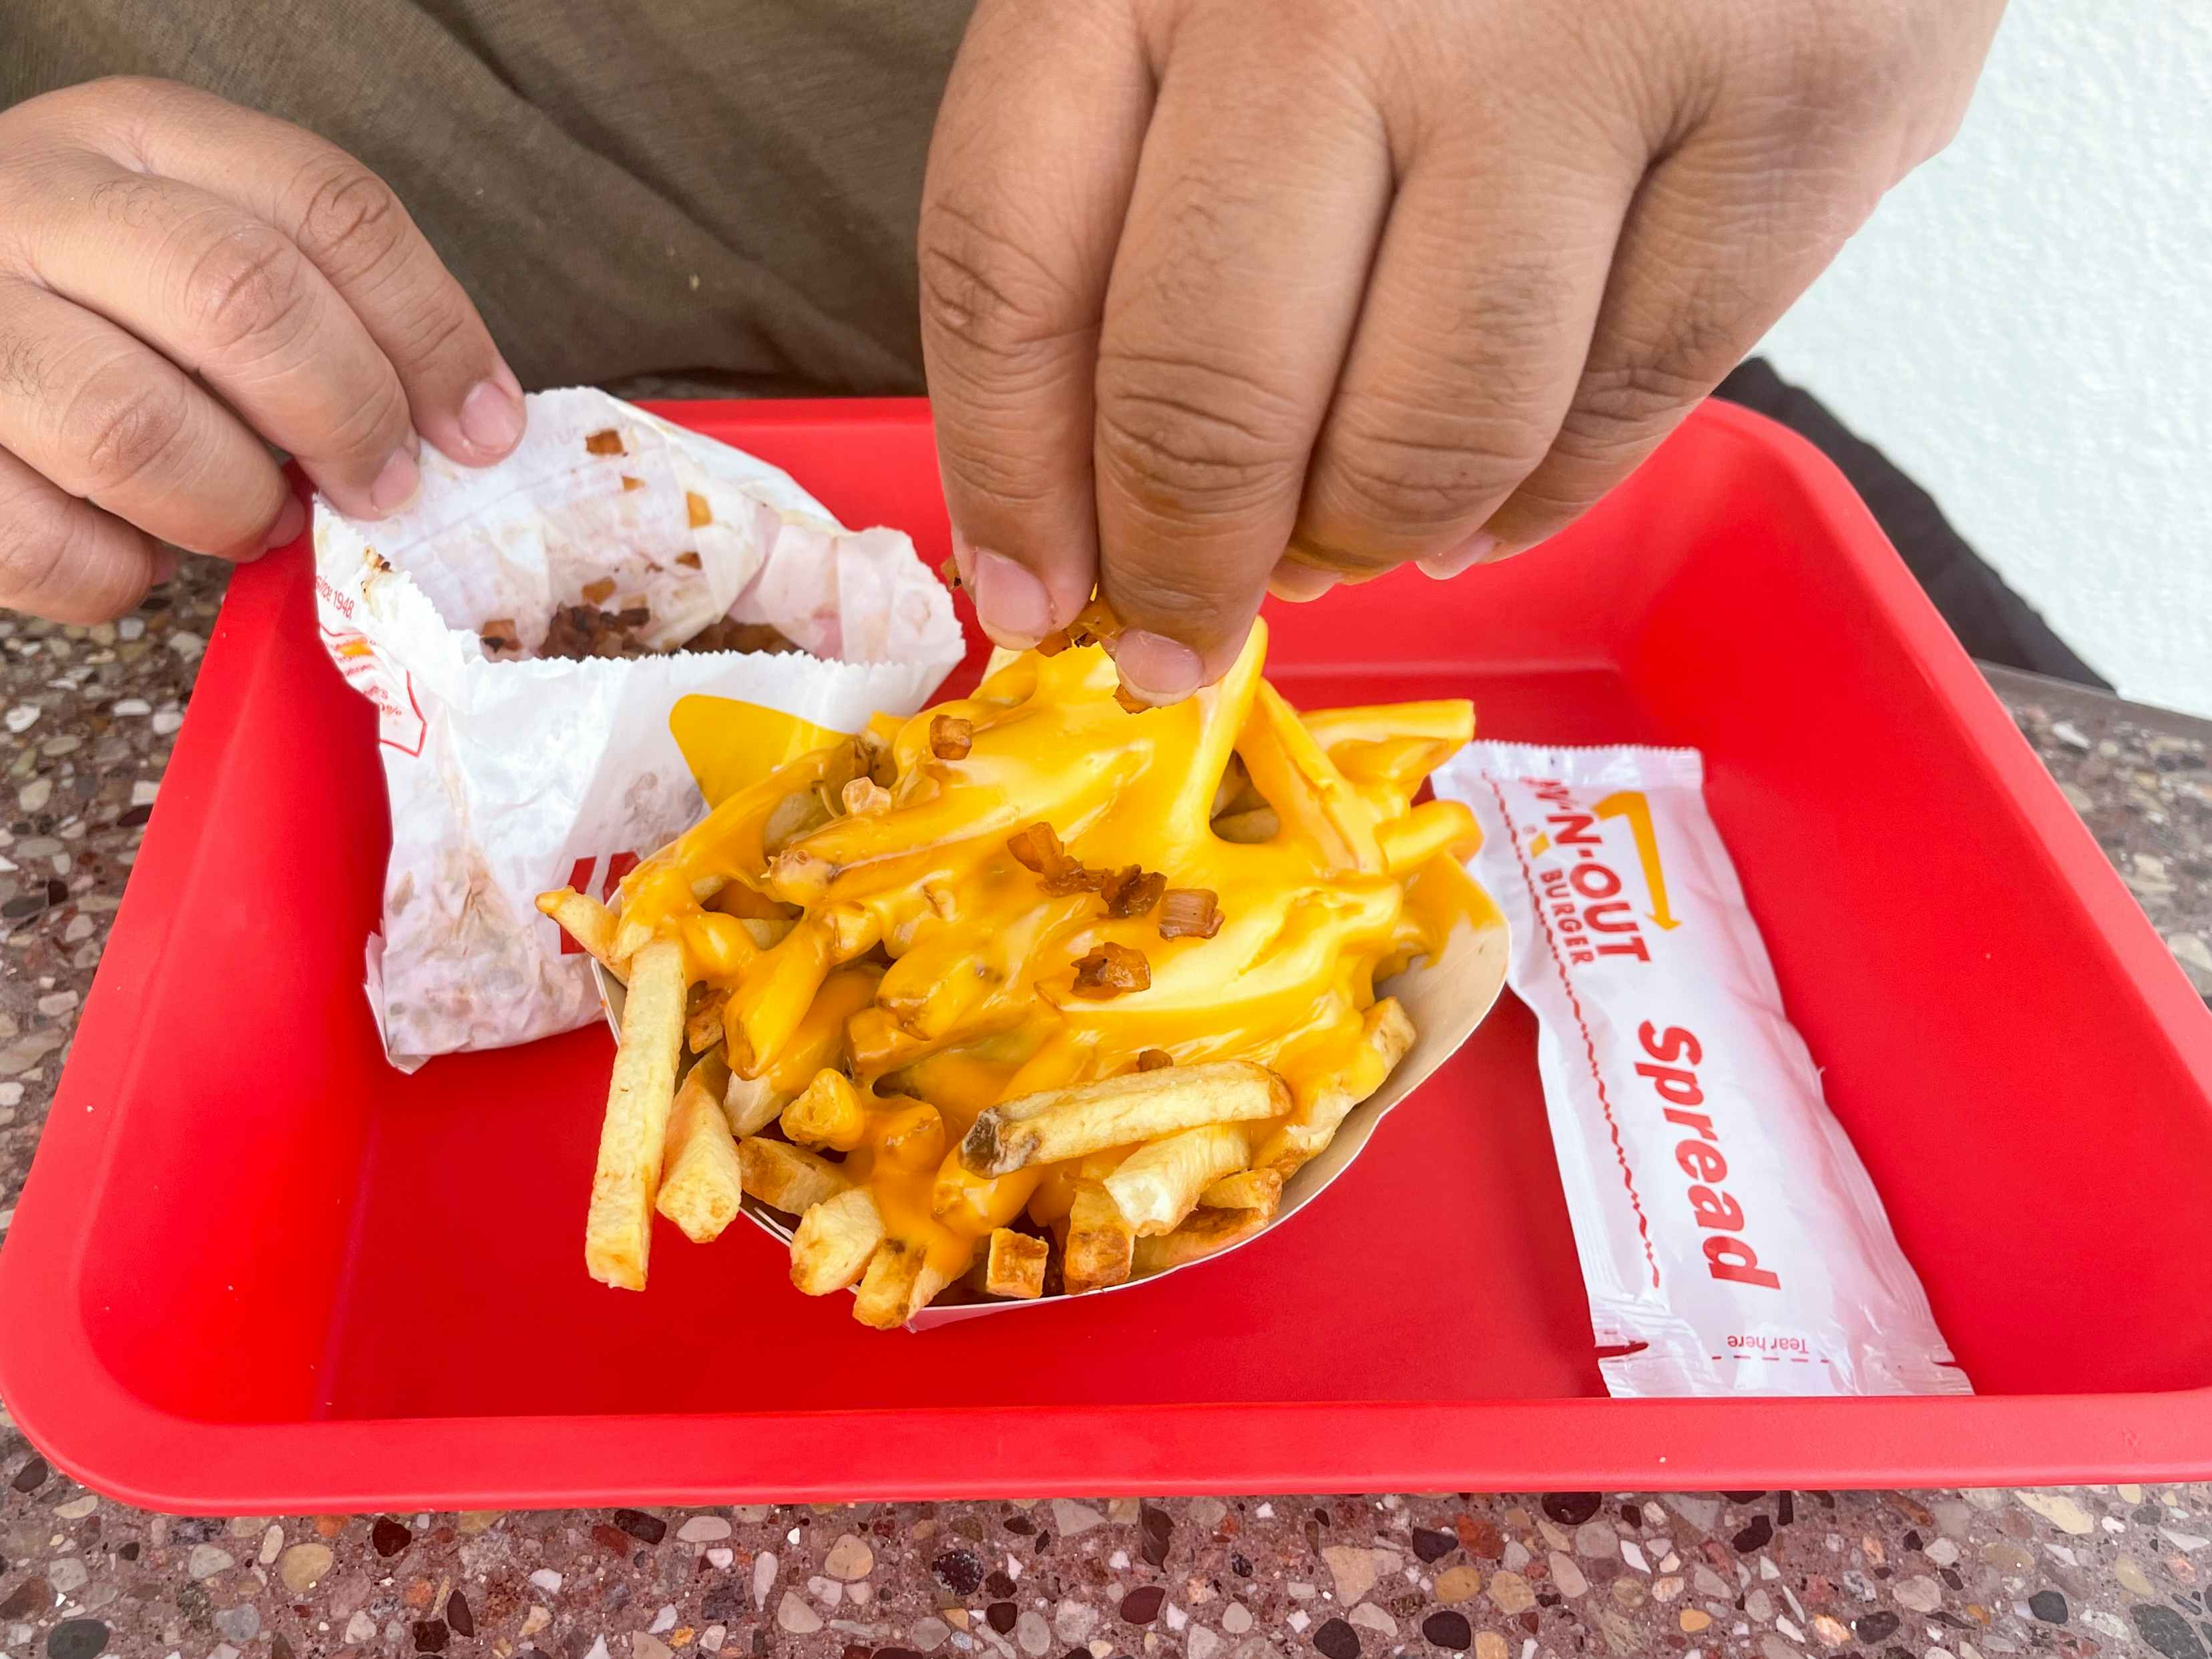 A person adding grilled onion to an order of french fries with melted cheese on top, with a packet of In-N-Out spread on the tray beside the fries, part of the in n out secret menu.